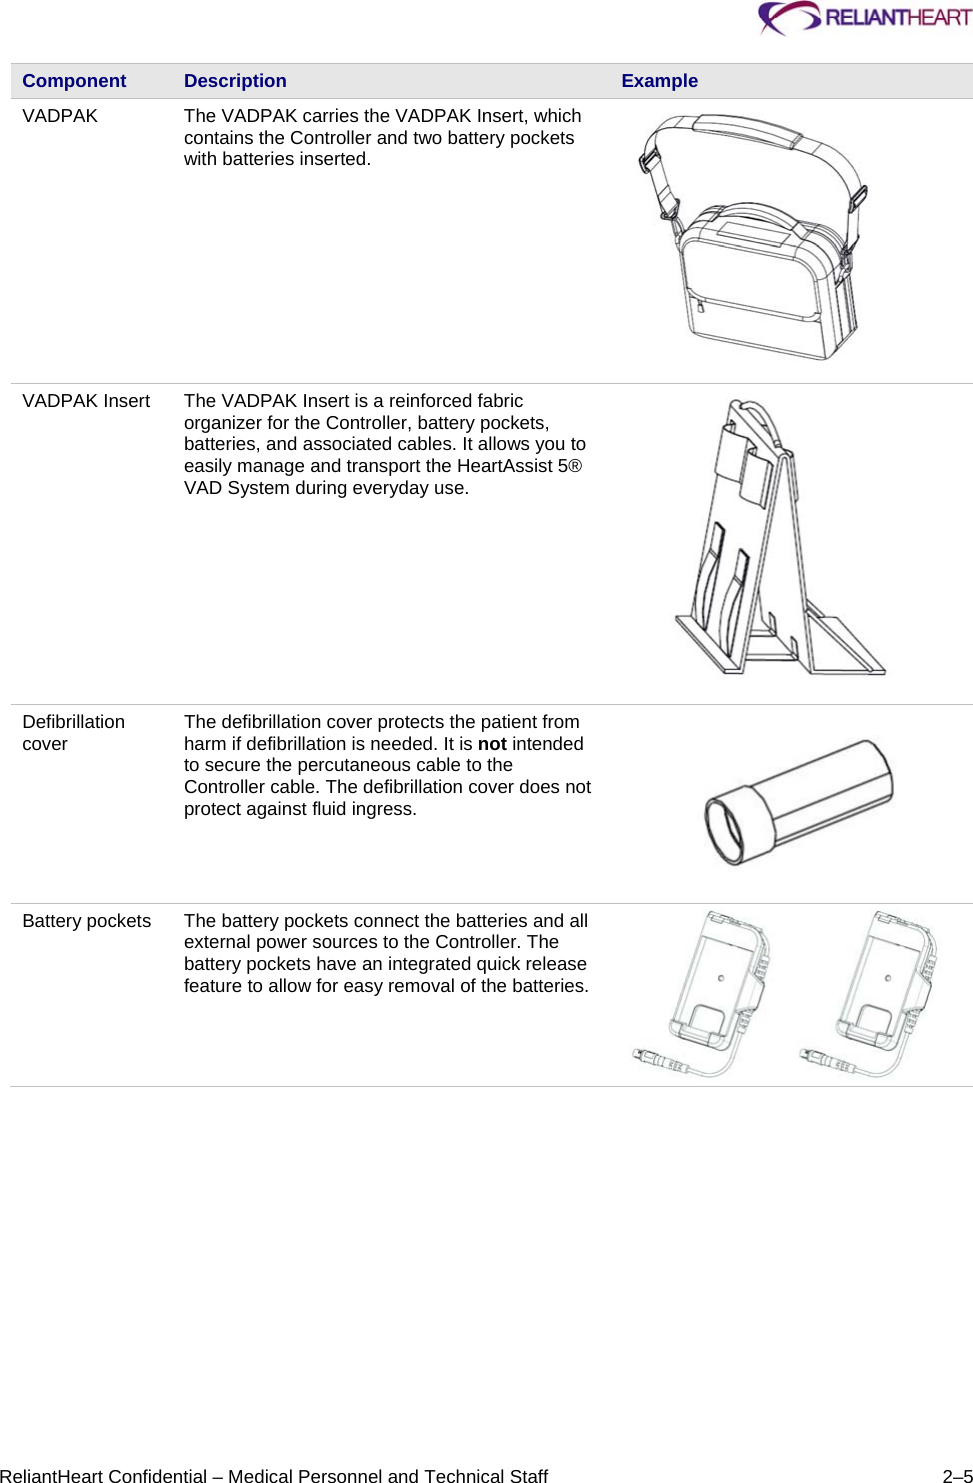     ReliantHeart Confidential – Medical Personnel and Technical Staff  2–5 Component  Description  Example VADPAK   The VADPAK carries the VADPAK Insert, which contains the Controller and two battery pockets with batteries inserted.  VADPAK Insert   The VADPAK Insert is a reinforced fabric organizer for the Controller, battery pockets, batteries, and associated cables. It allows you to easily manage and transport the HeartAssist 5® VAD System during everyday use.  Defibrillation cover  The defibrillation cover protects the patient from harm if defibrillation is needed. It is not intended to secure the percutaneous cable to the Controller cable. The defibrillation cover does not protect against fluid ingress.  Battery pockets   The battery pockets connect the batteries and all external power sources to the Controller. The battery pockets have an integrated quick release feature to allow for easy removal of the batteries.    